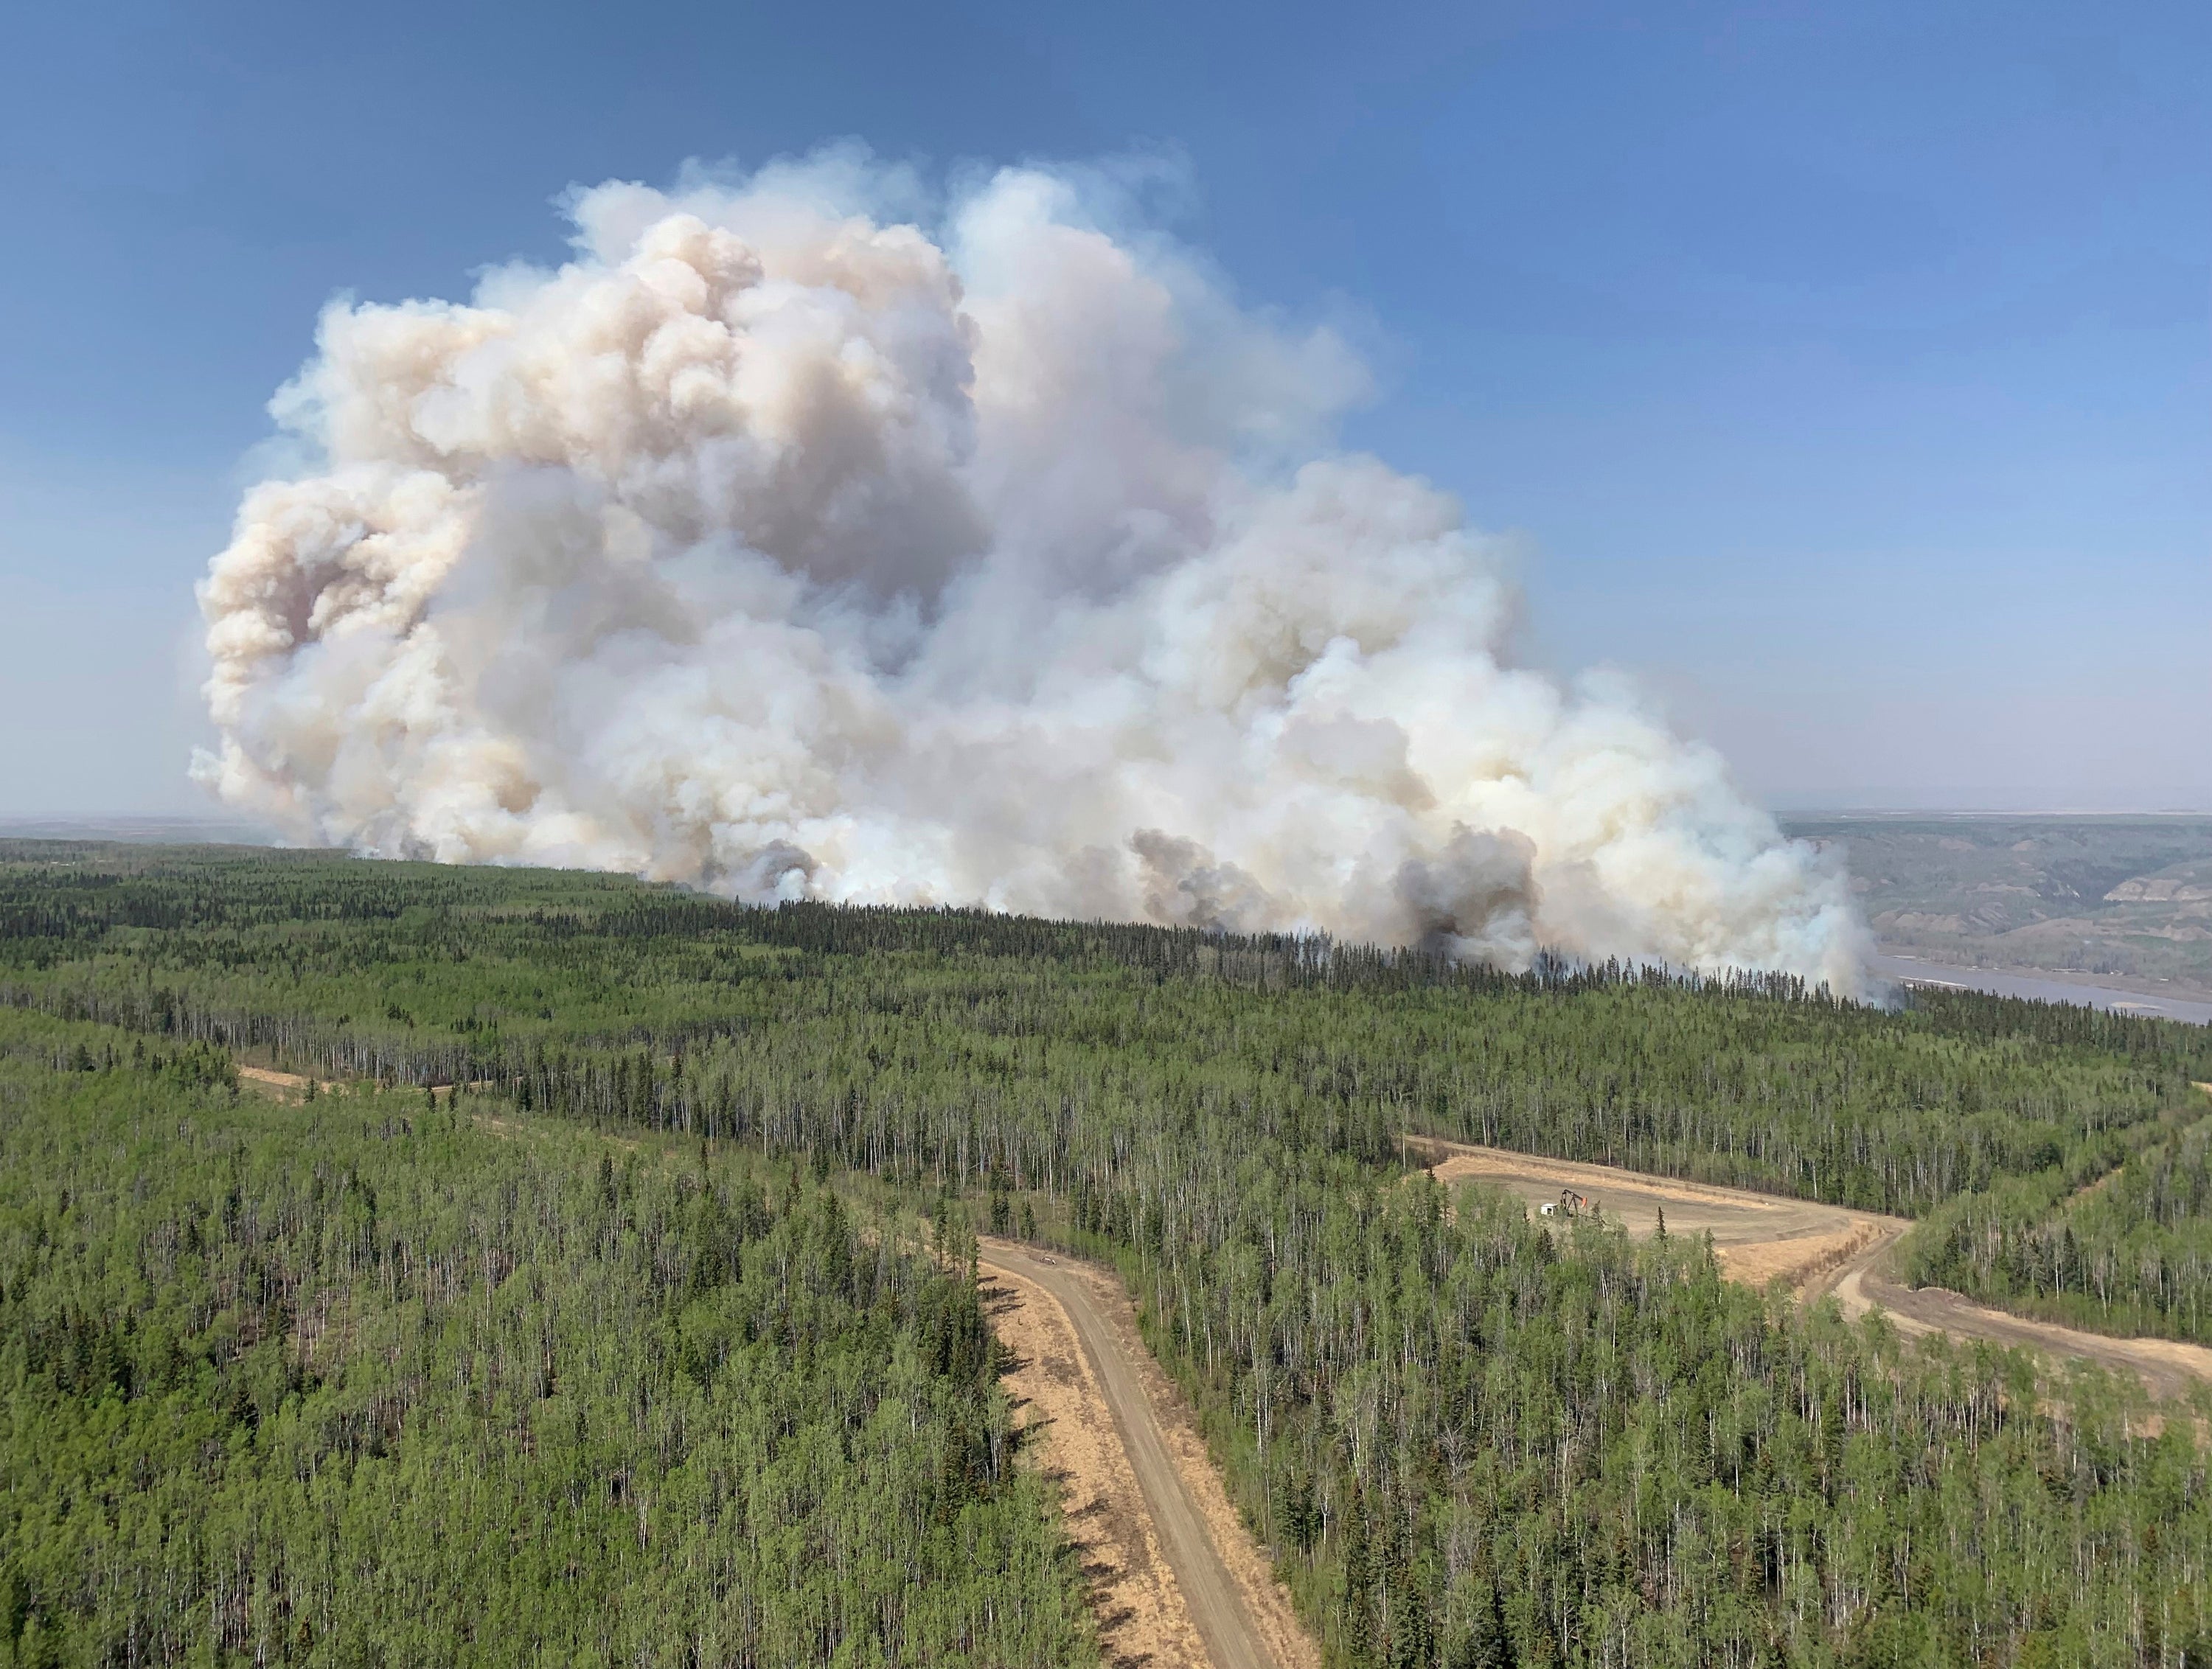 Wildfire burns a section of forest in the Grande Prairie district of Alberta, Canada on May 6